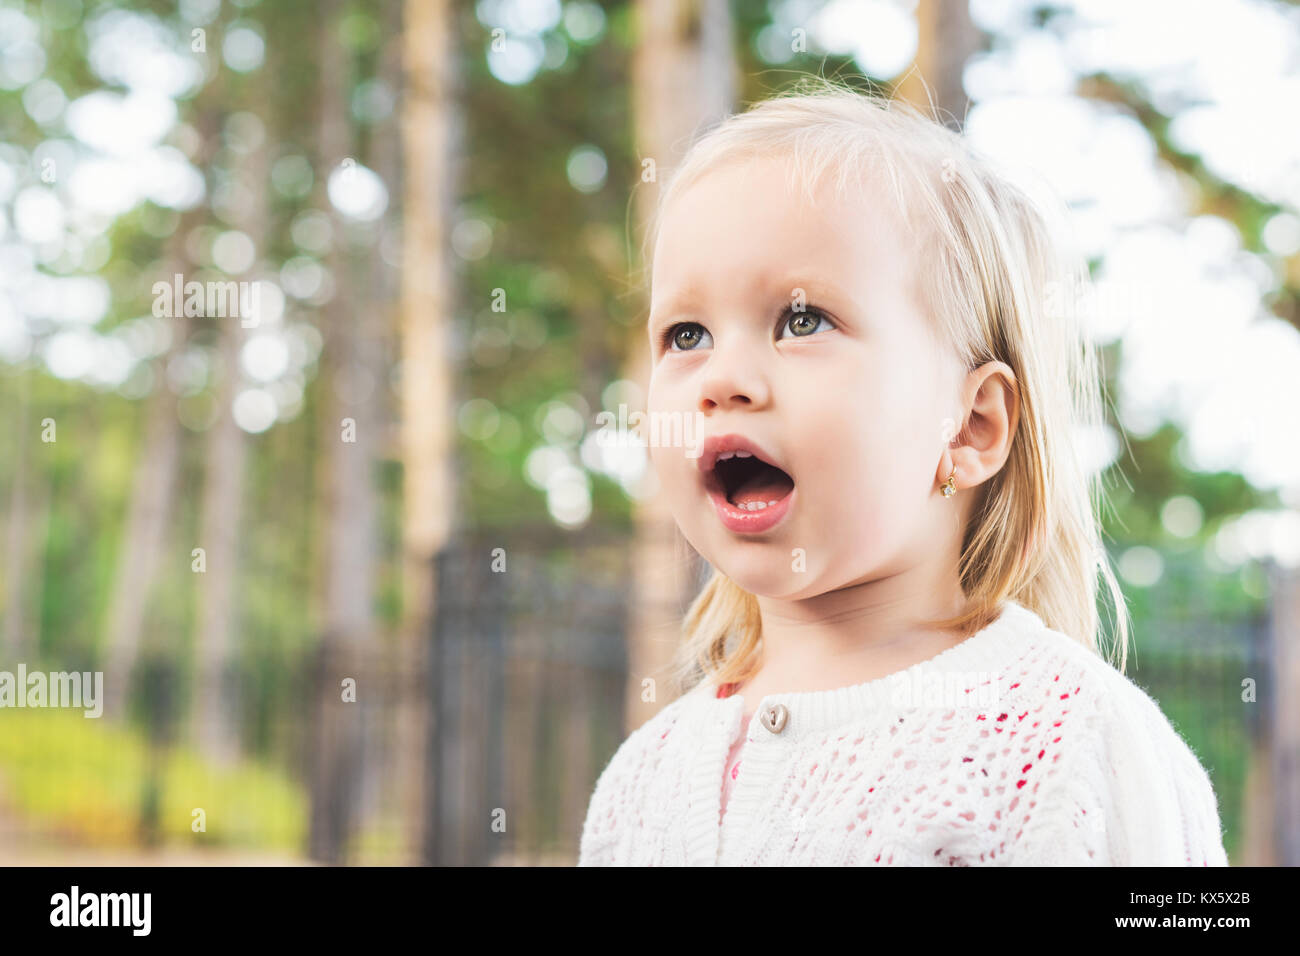 Image of sweet baby girl looking away from camera with mouth open in amazement. Close up portrait of a child. Cute toddler with green eyes portrait. Stock Photo